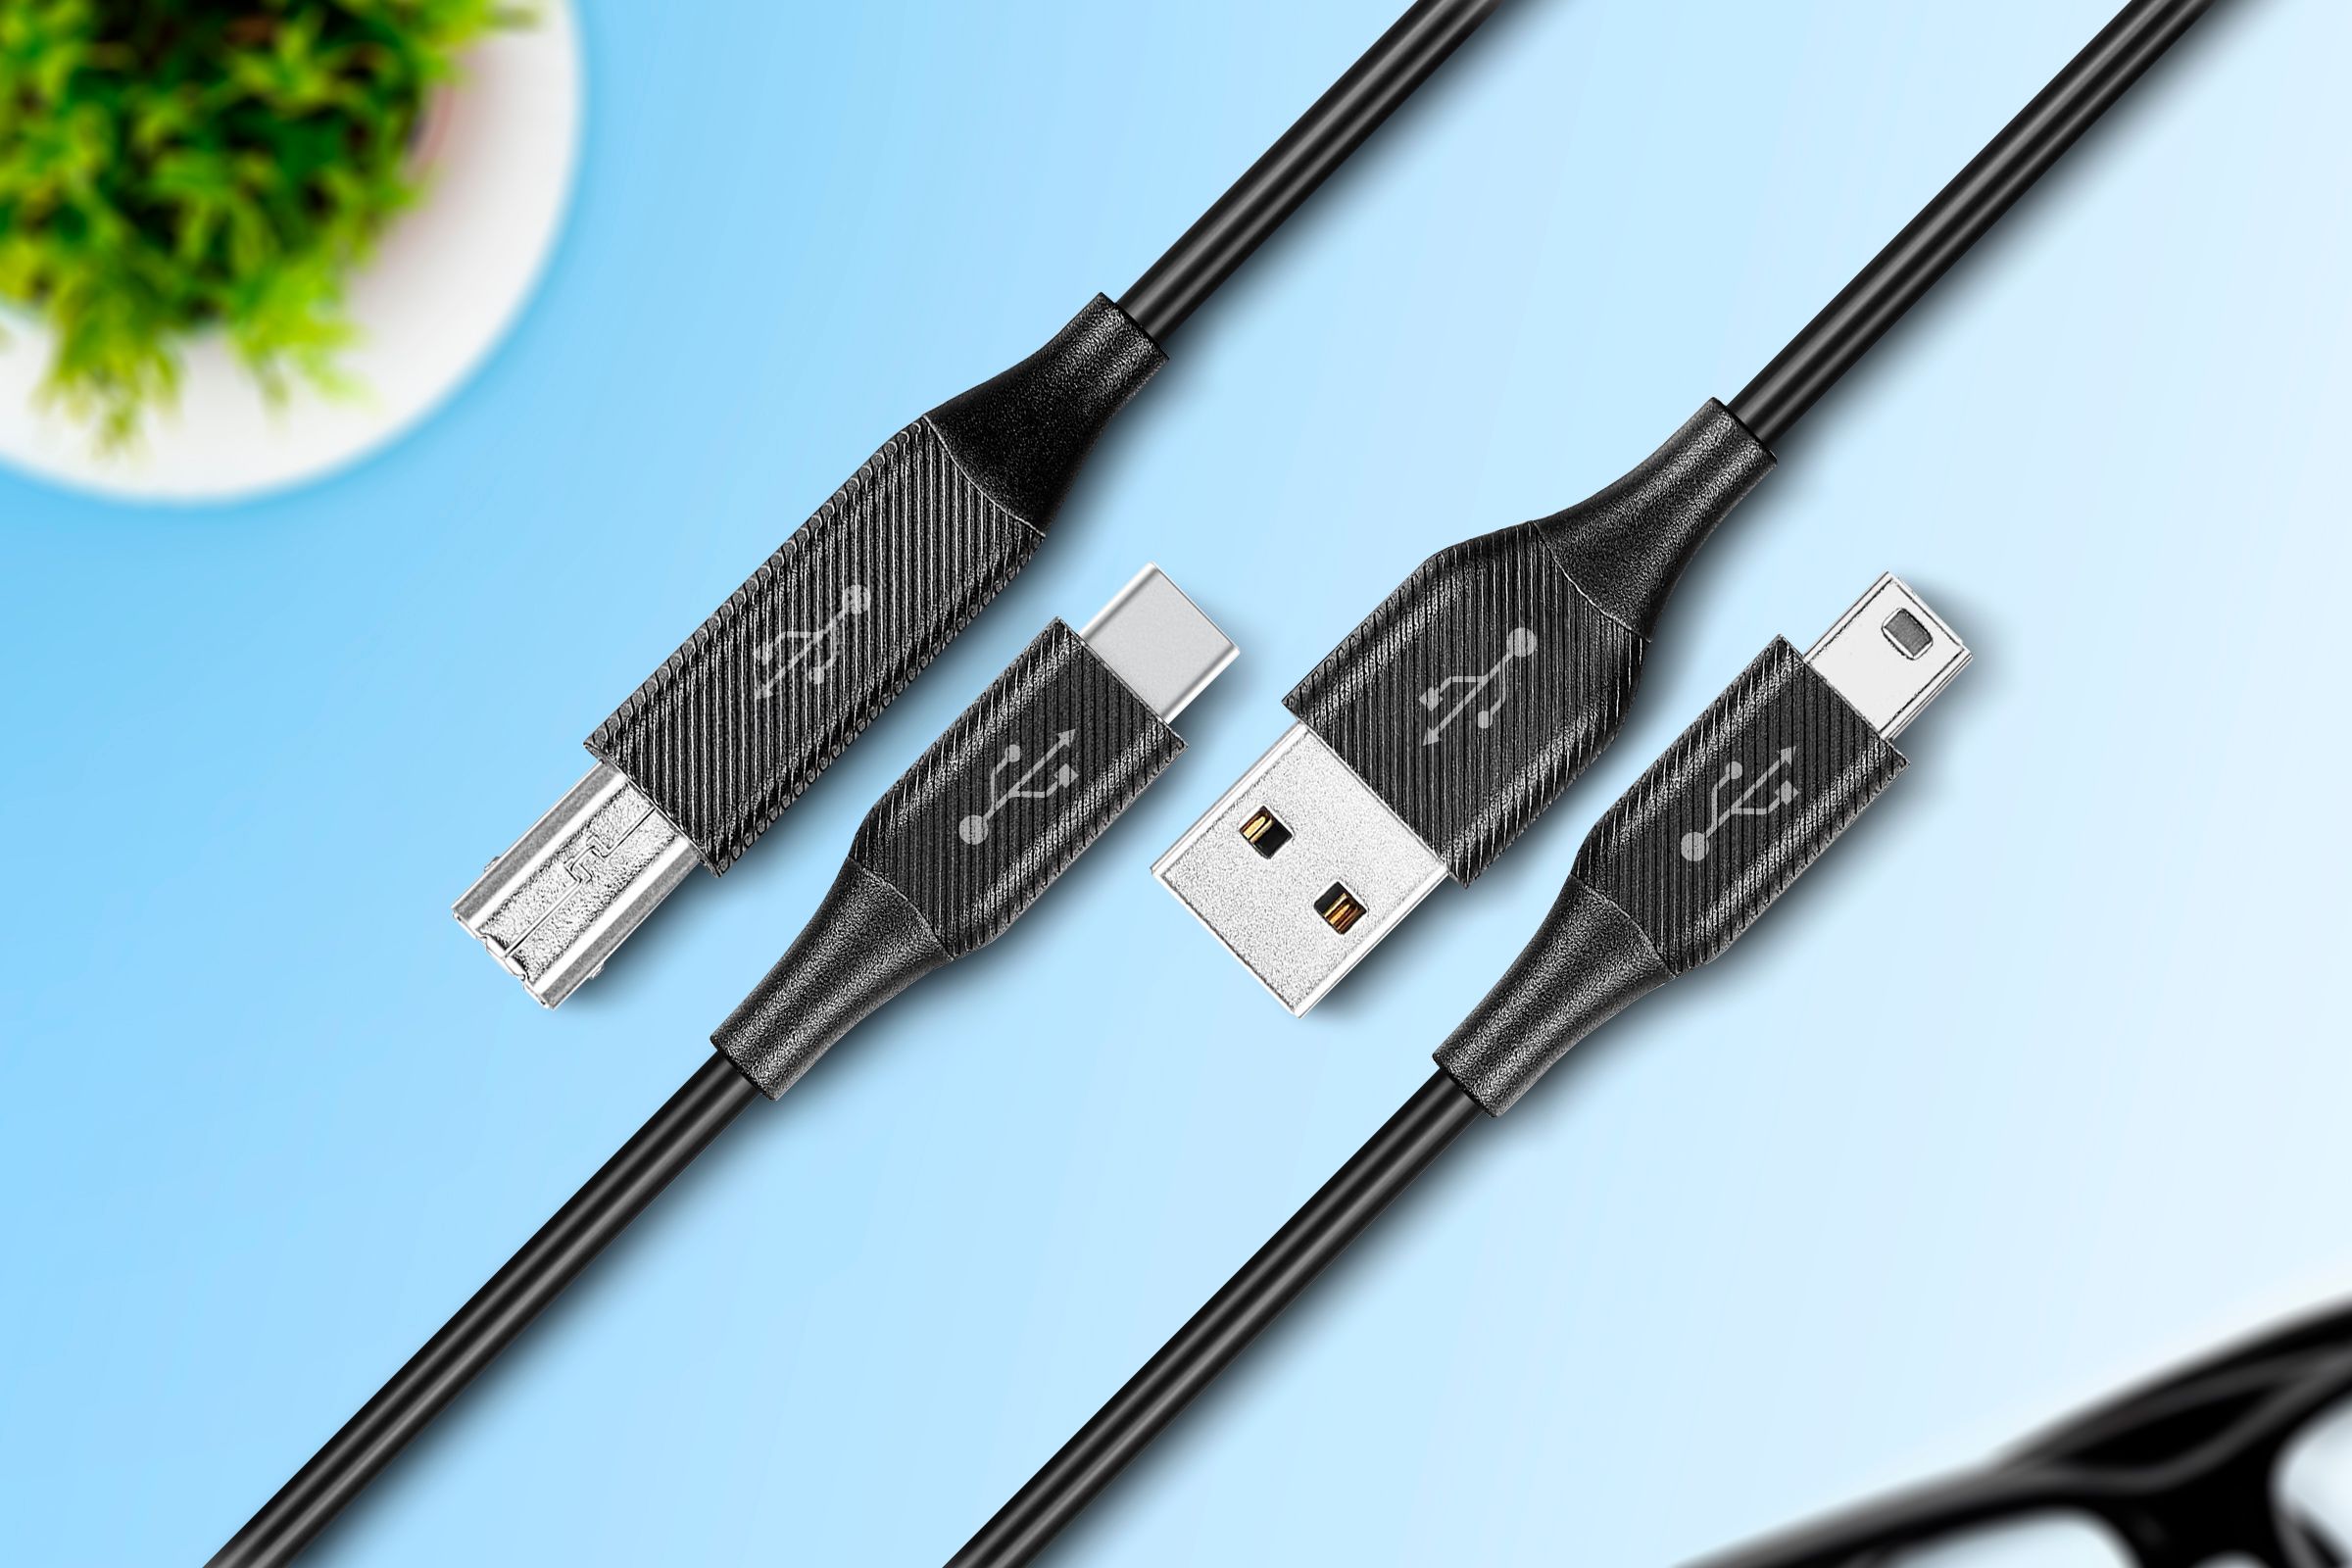 Different types of USB cable side by side.